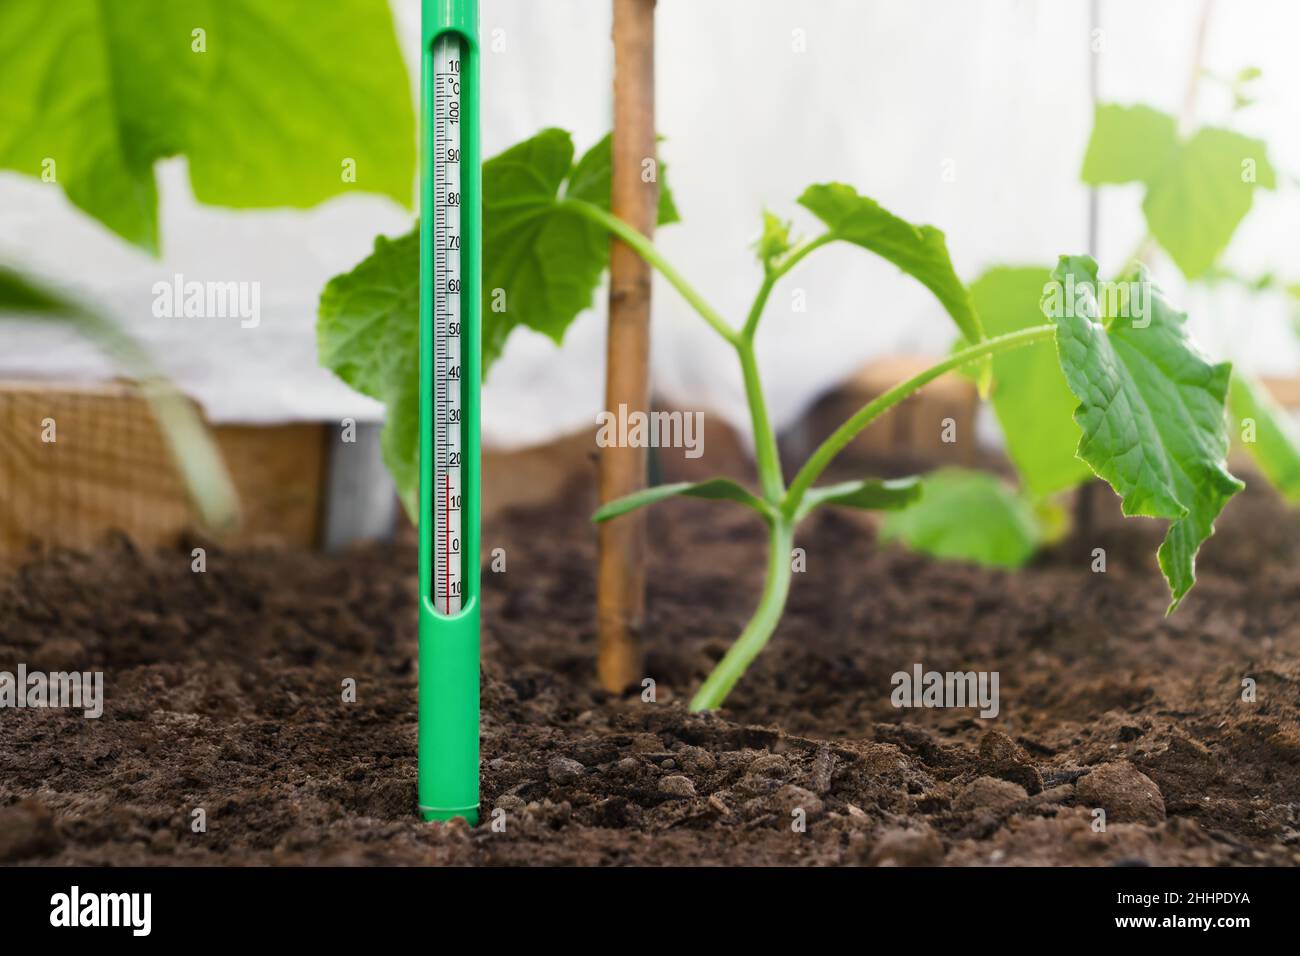 Measurement of soil temperature in a garden bed with cucumber seedlings. Climate control for growing vegetables Stock Photo